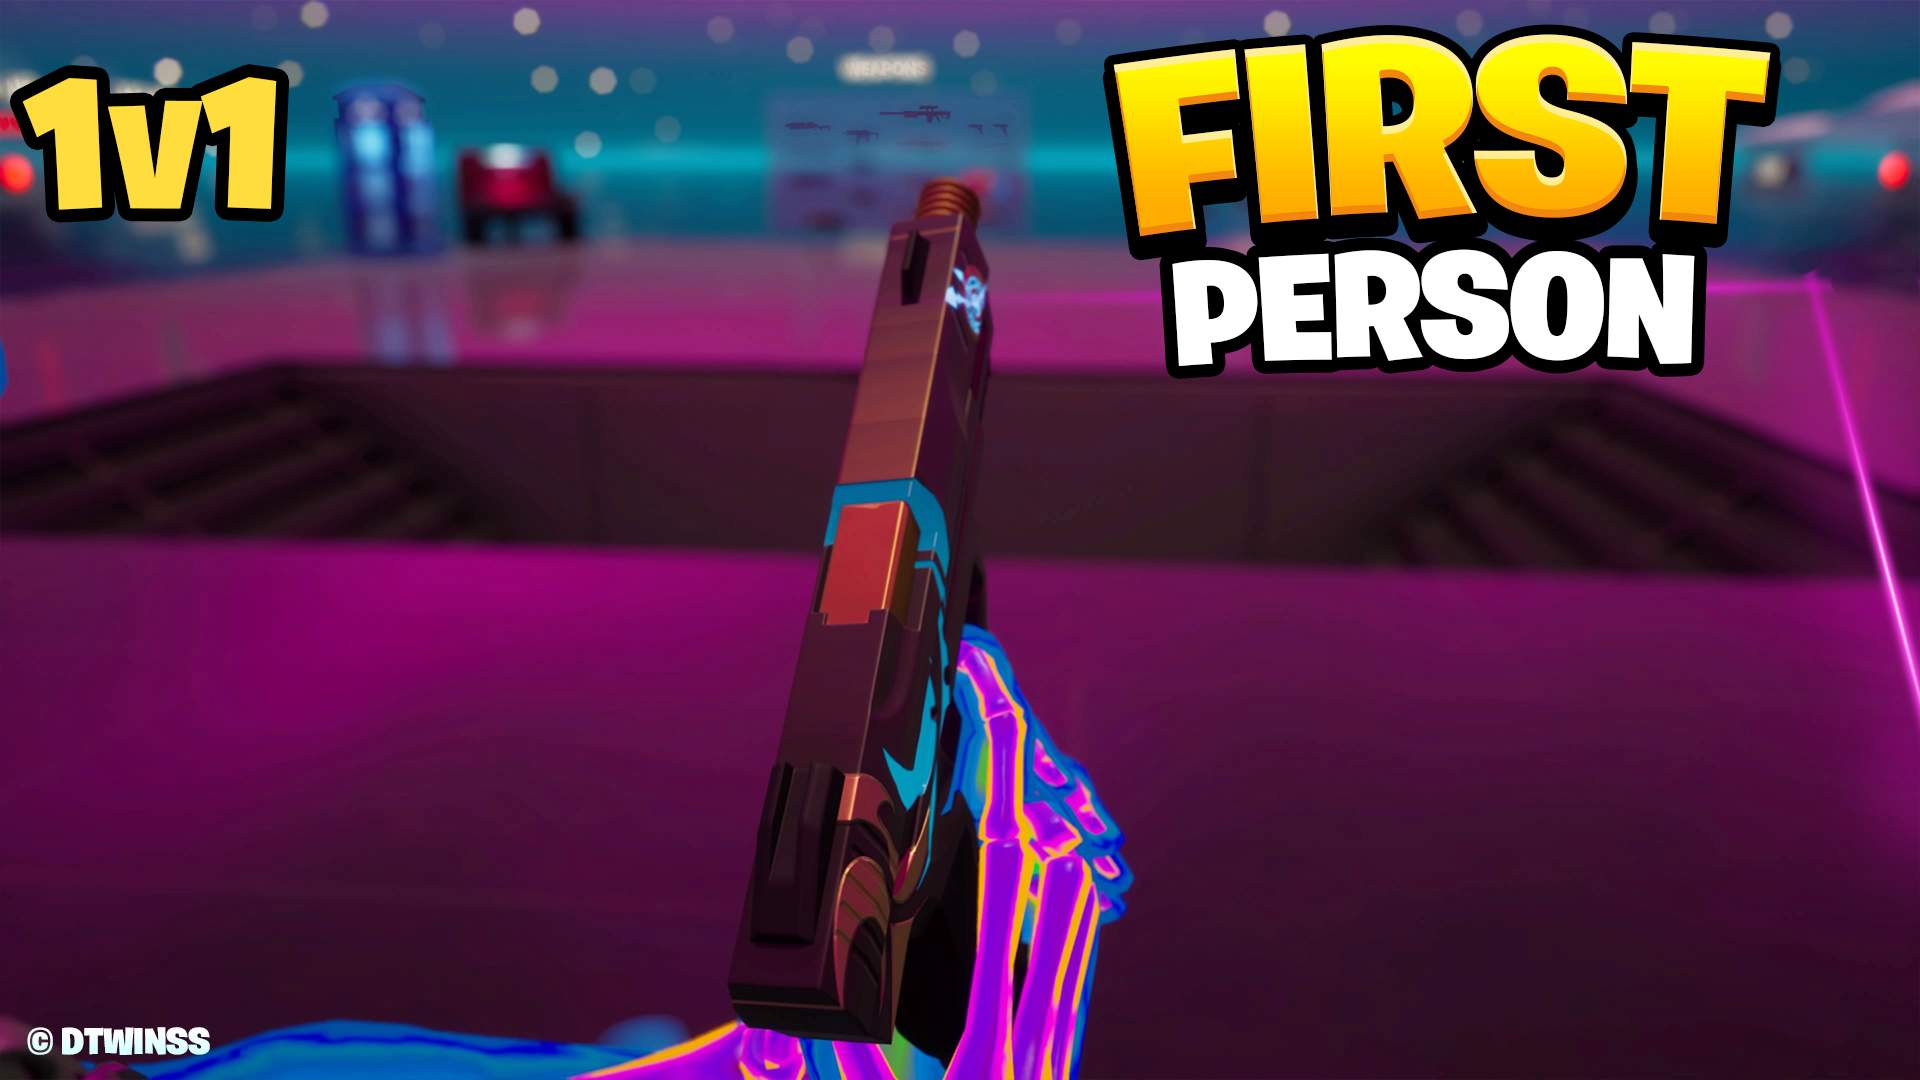 First Person 1V1 Build Fight 👀